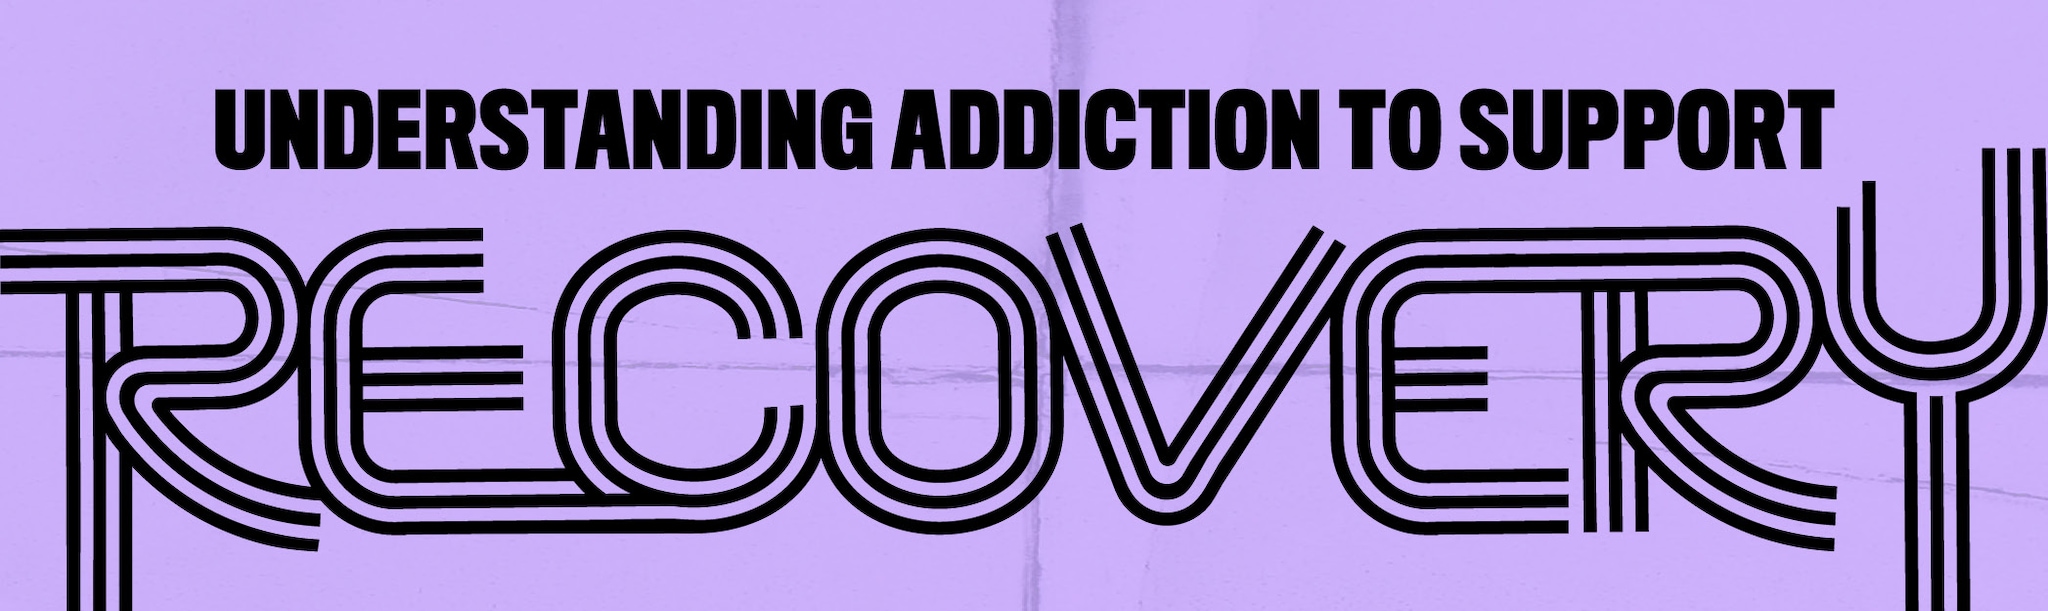 addiction, withdrawal symptoms and support